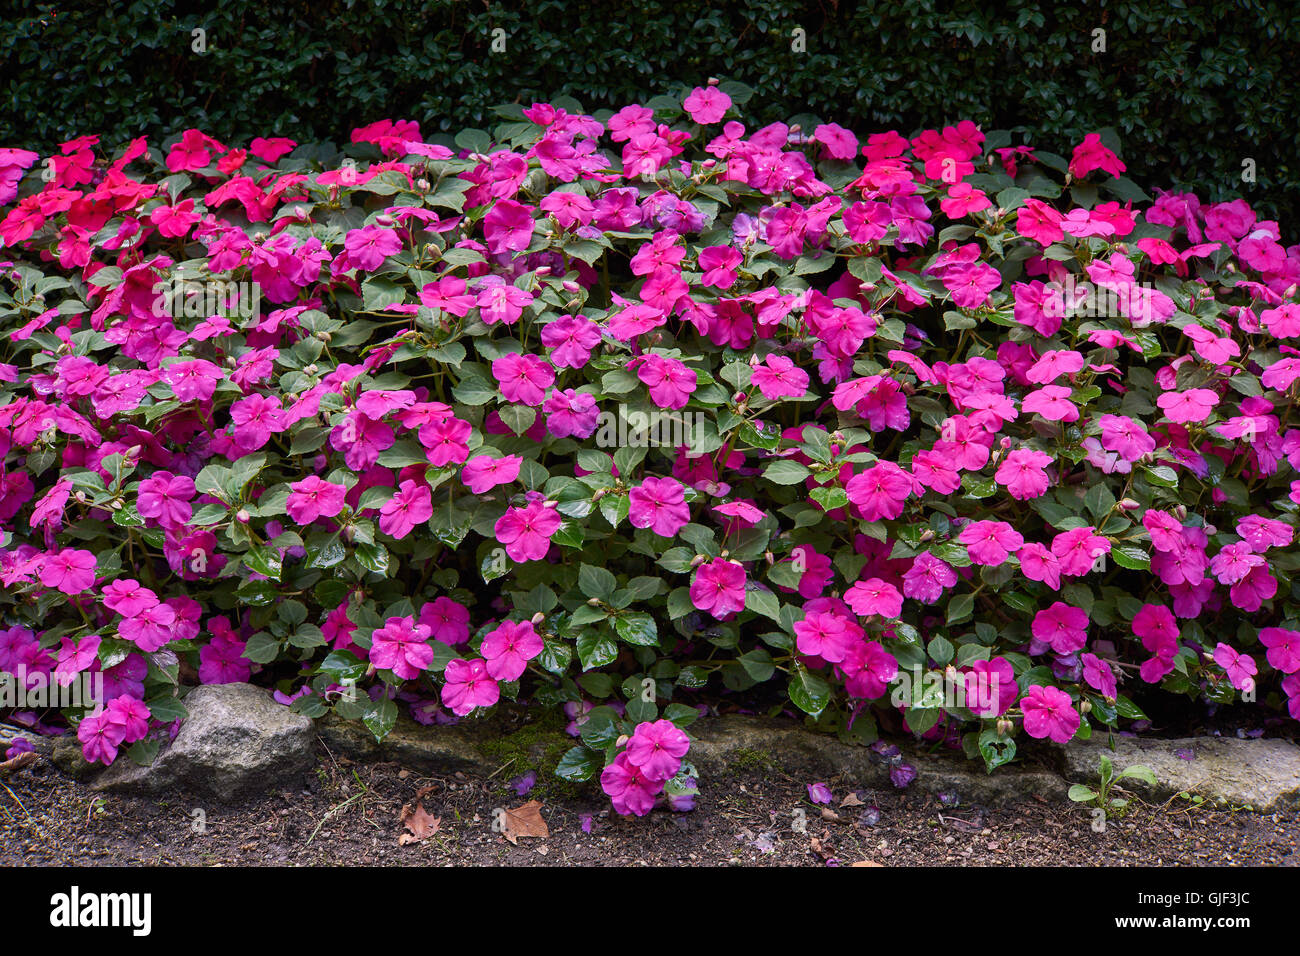 Impatiens walleriana lots of purple pink  flowers on the flower bed sultanii busy Lizzie balsam, sultana,impatiens Stock Photo